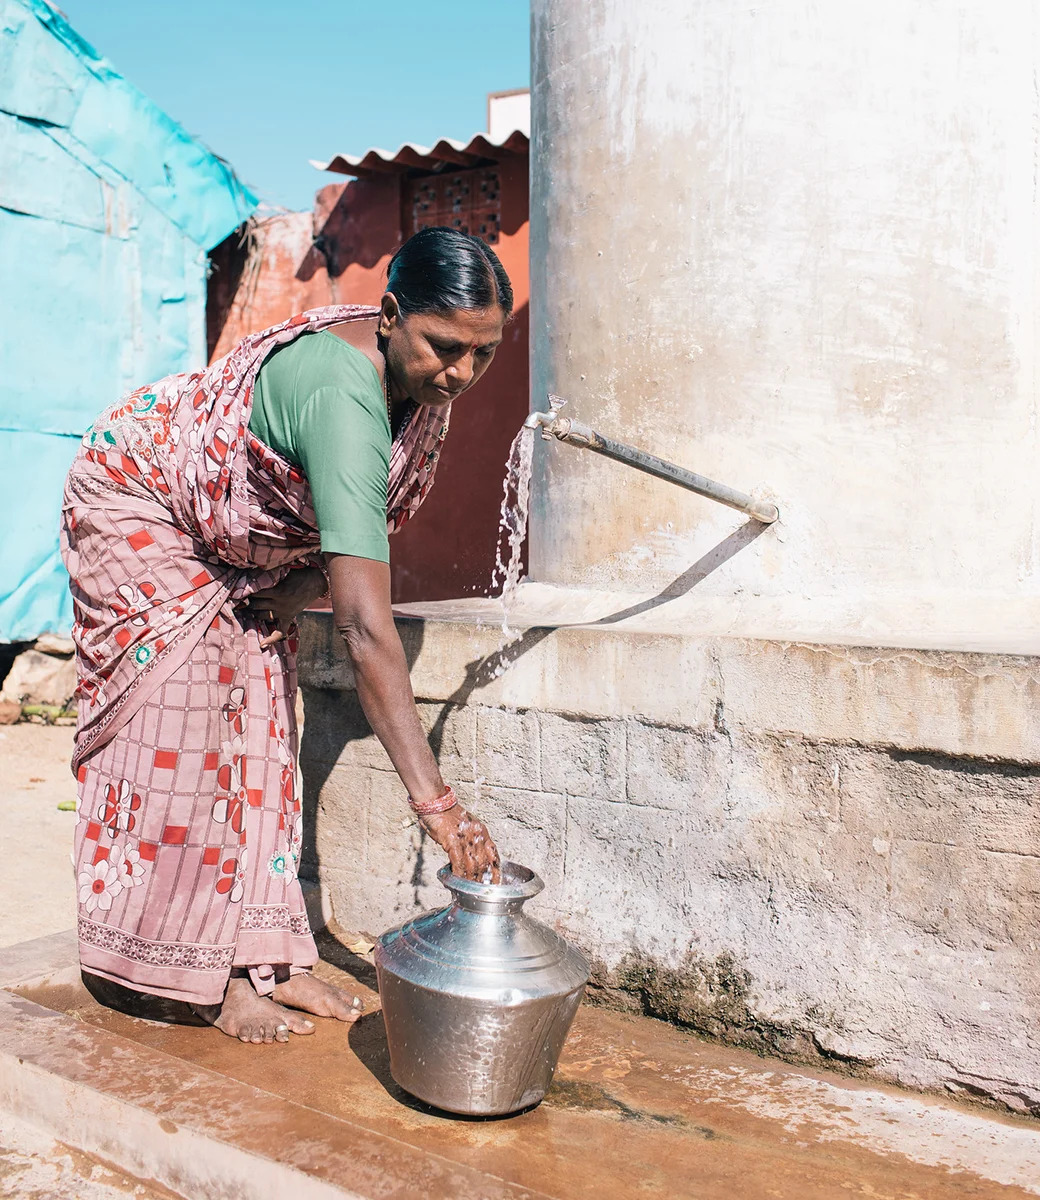 Water.Org has helped 60 million people gain access to clean water over the years